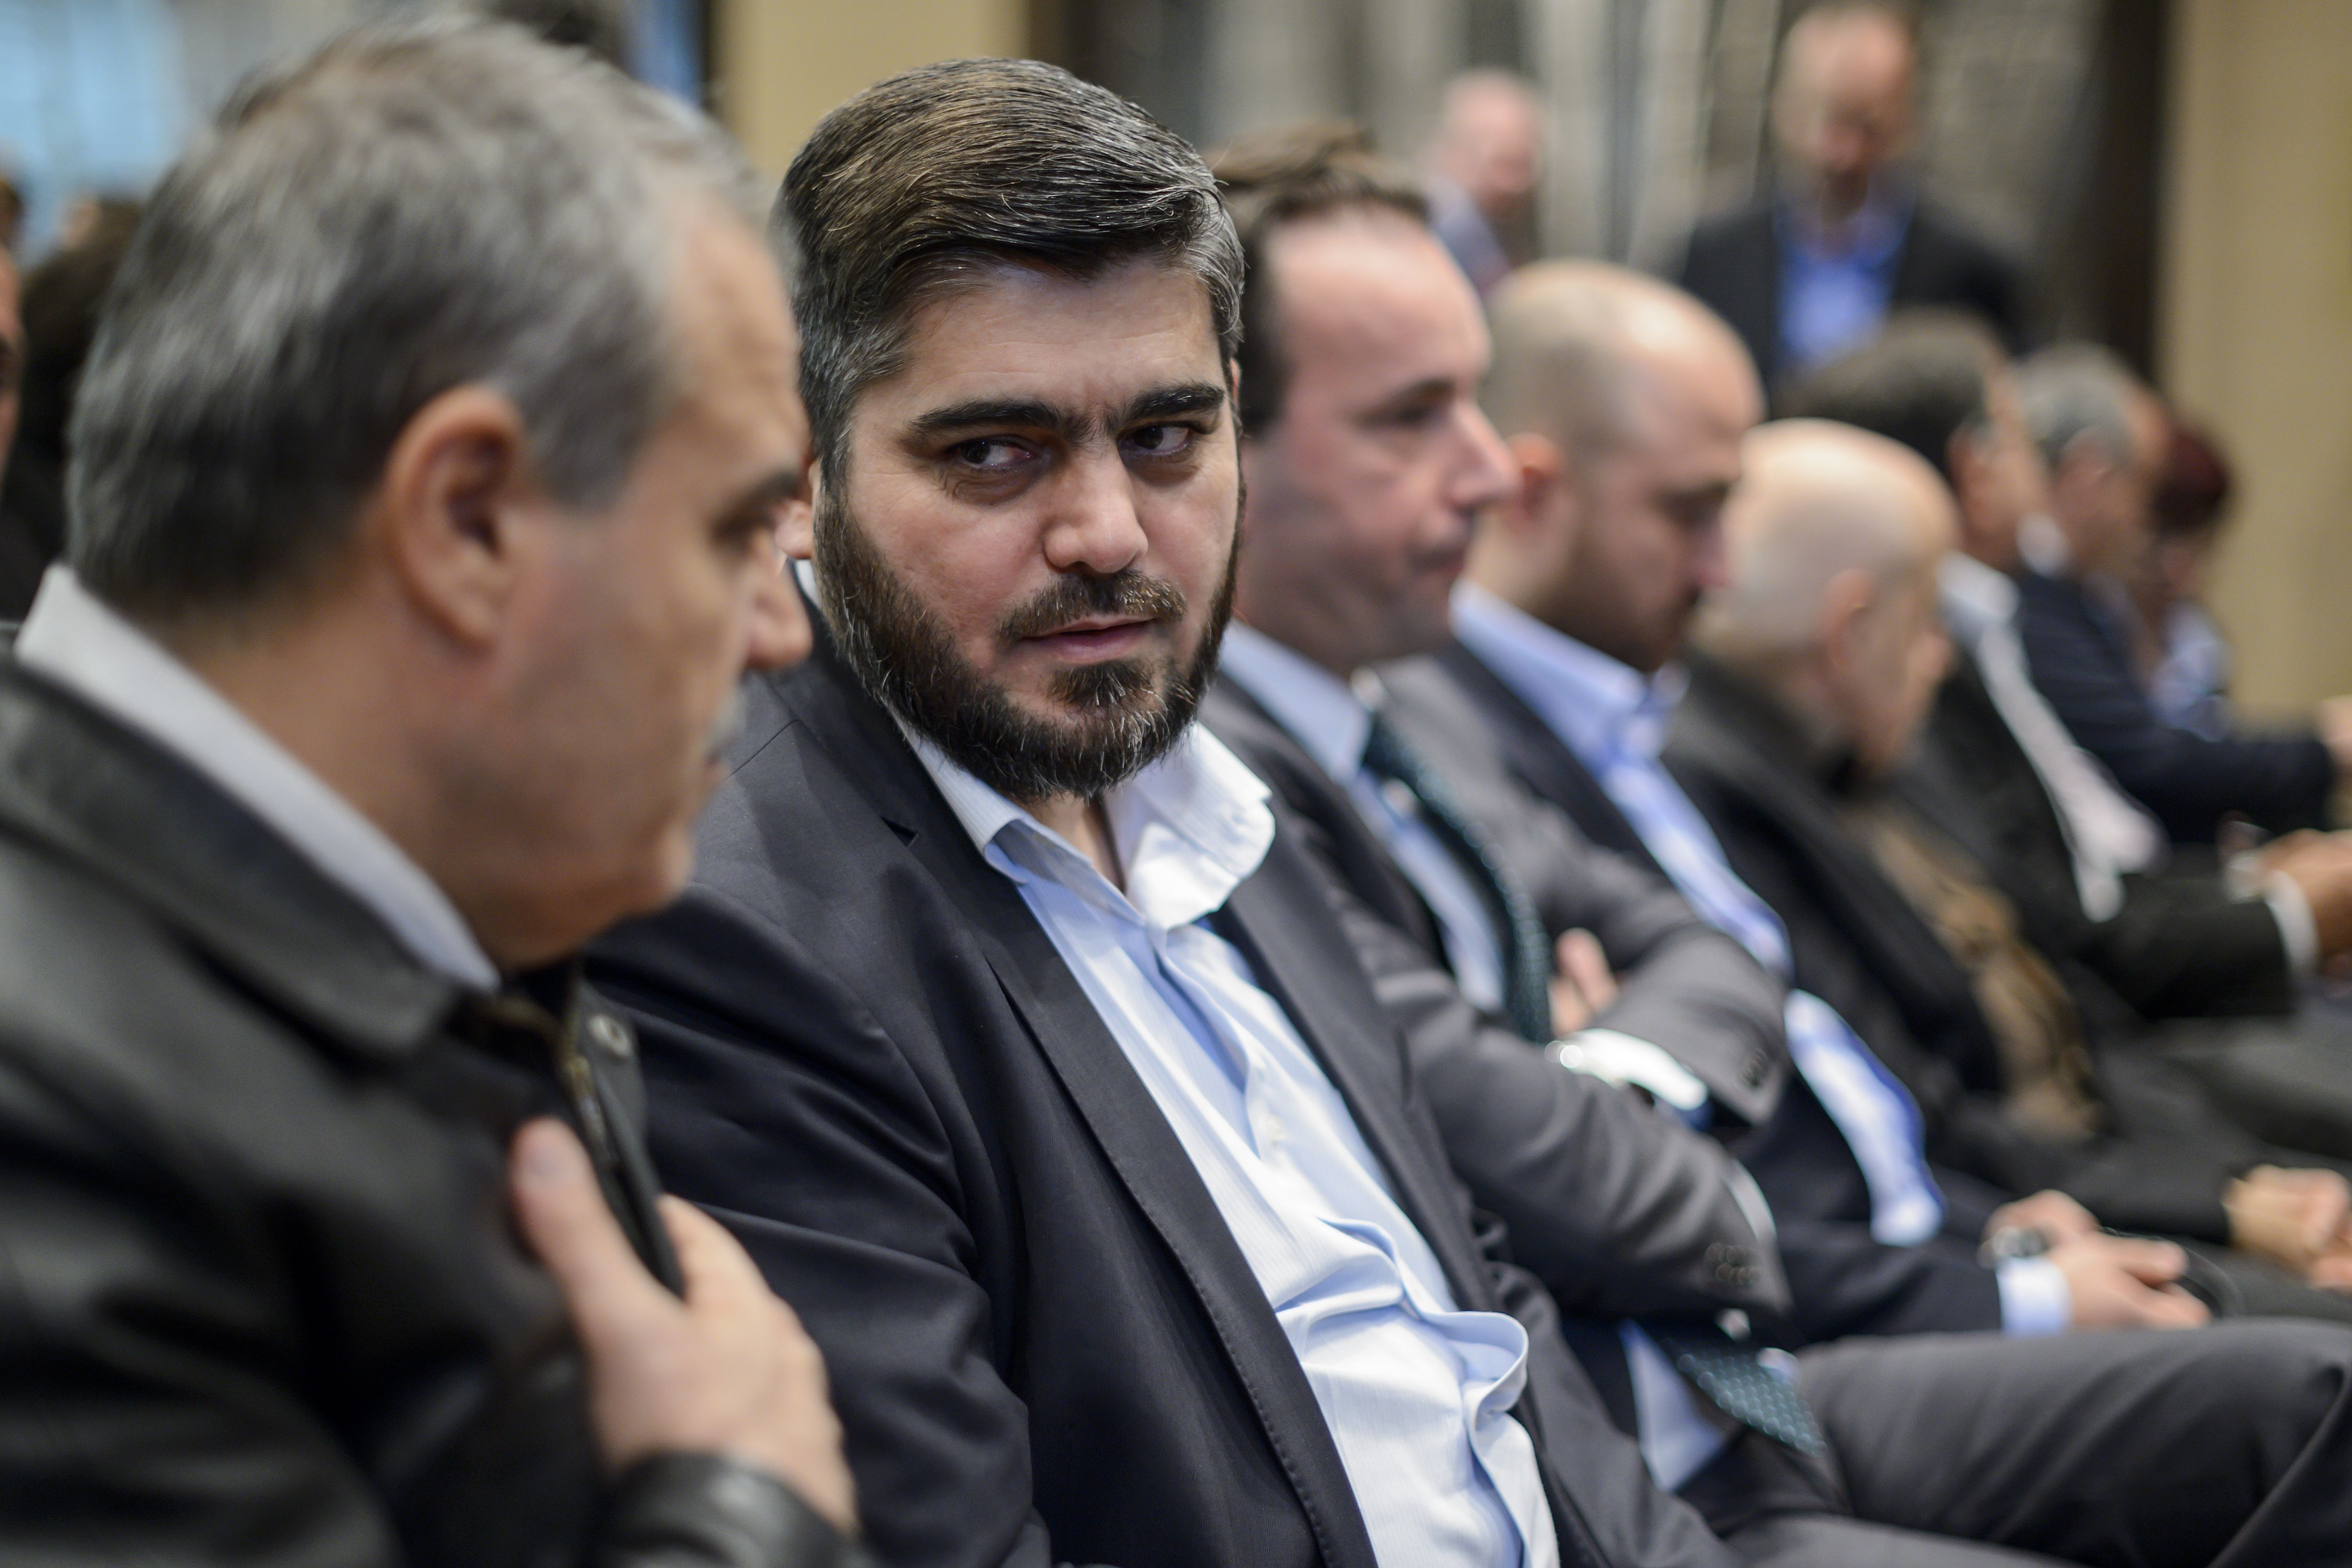 Chief negotiator for the main Syrian opposition body, Mohammed Alloush (2nd L) speaks with delegation head Asaad al-Zoabi in Geneva on April 19, 2016 (Fabrice Coffrini—AFP/Getty Images)